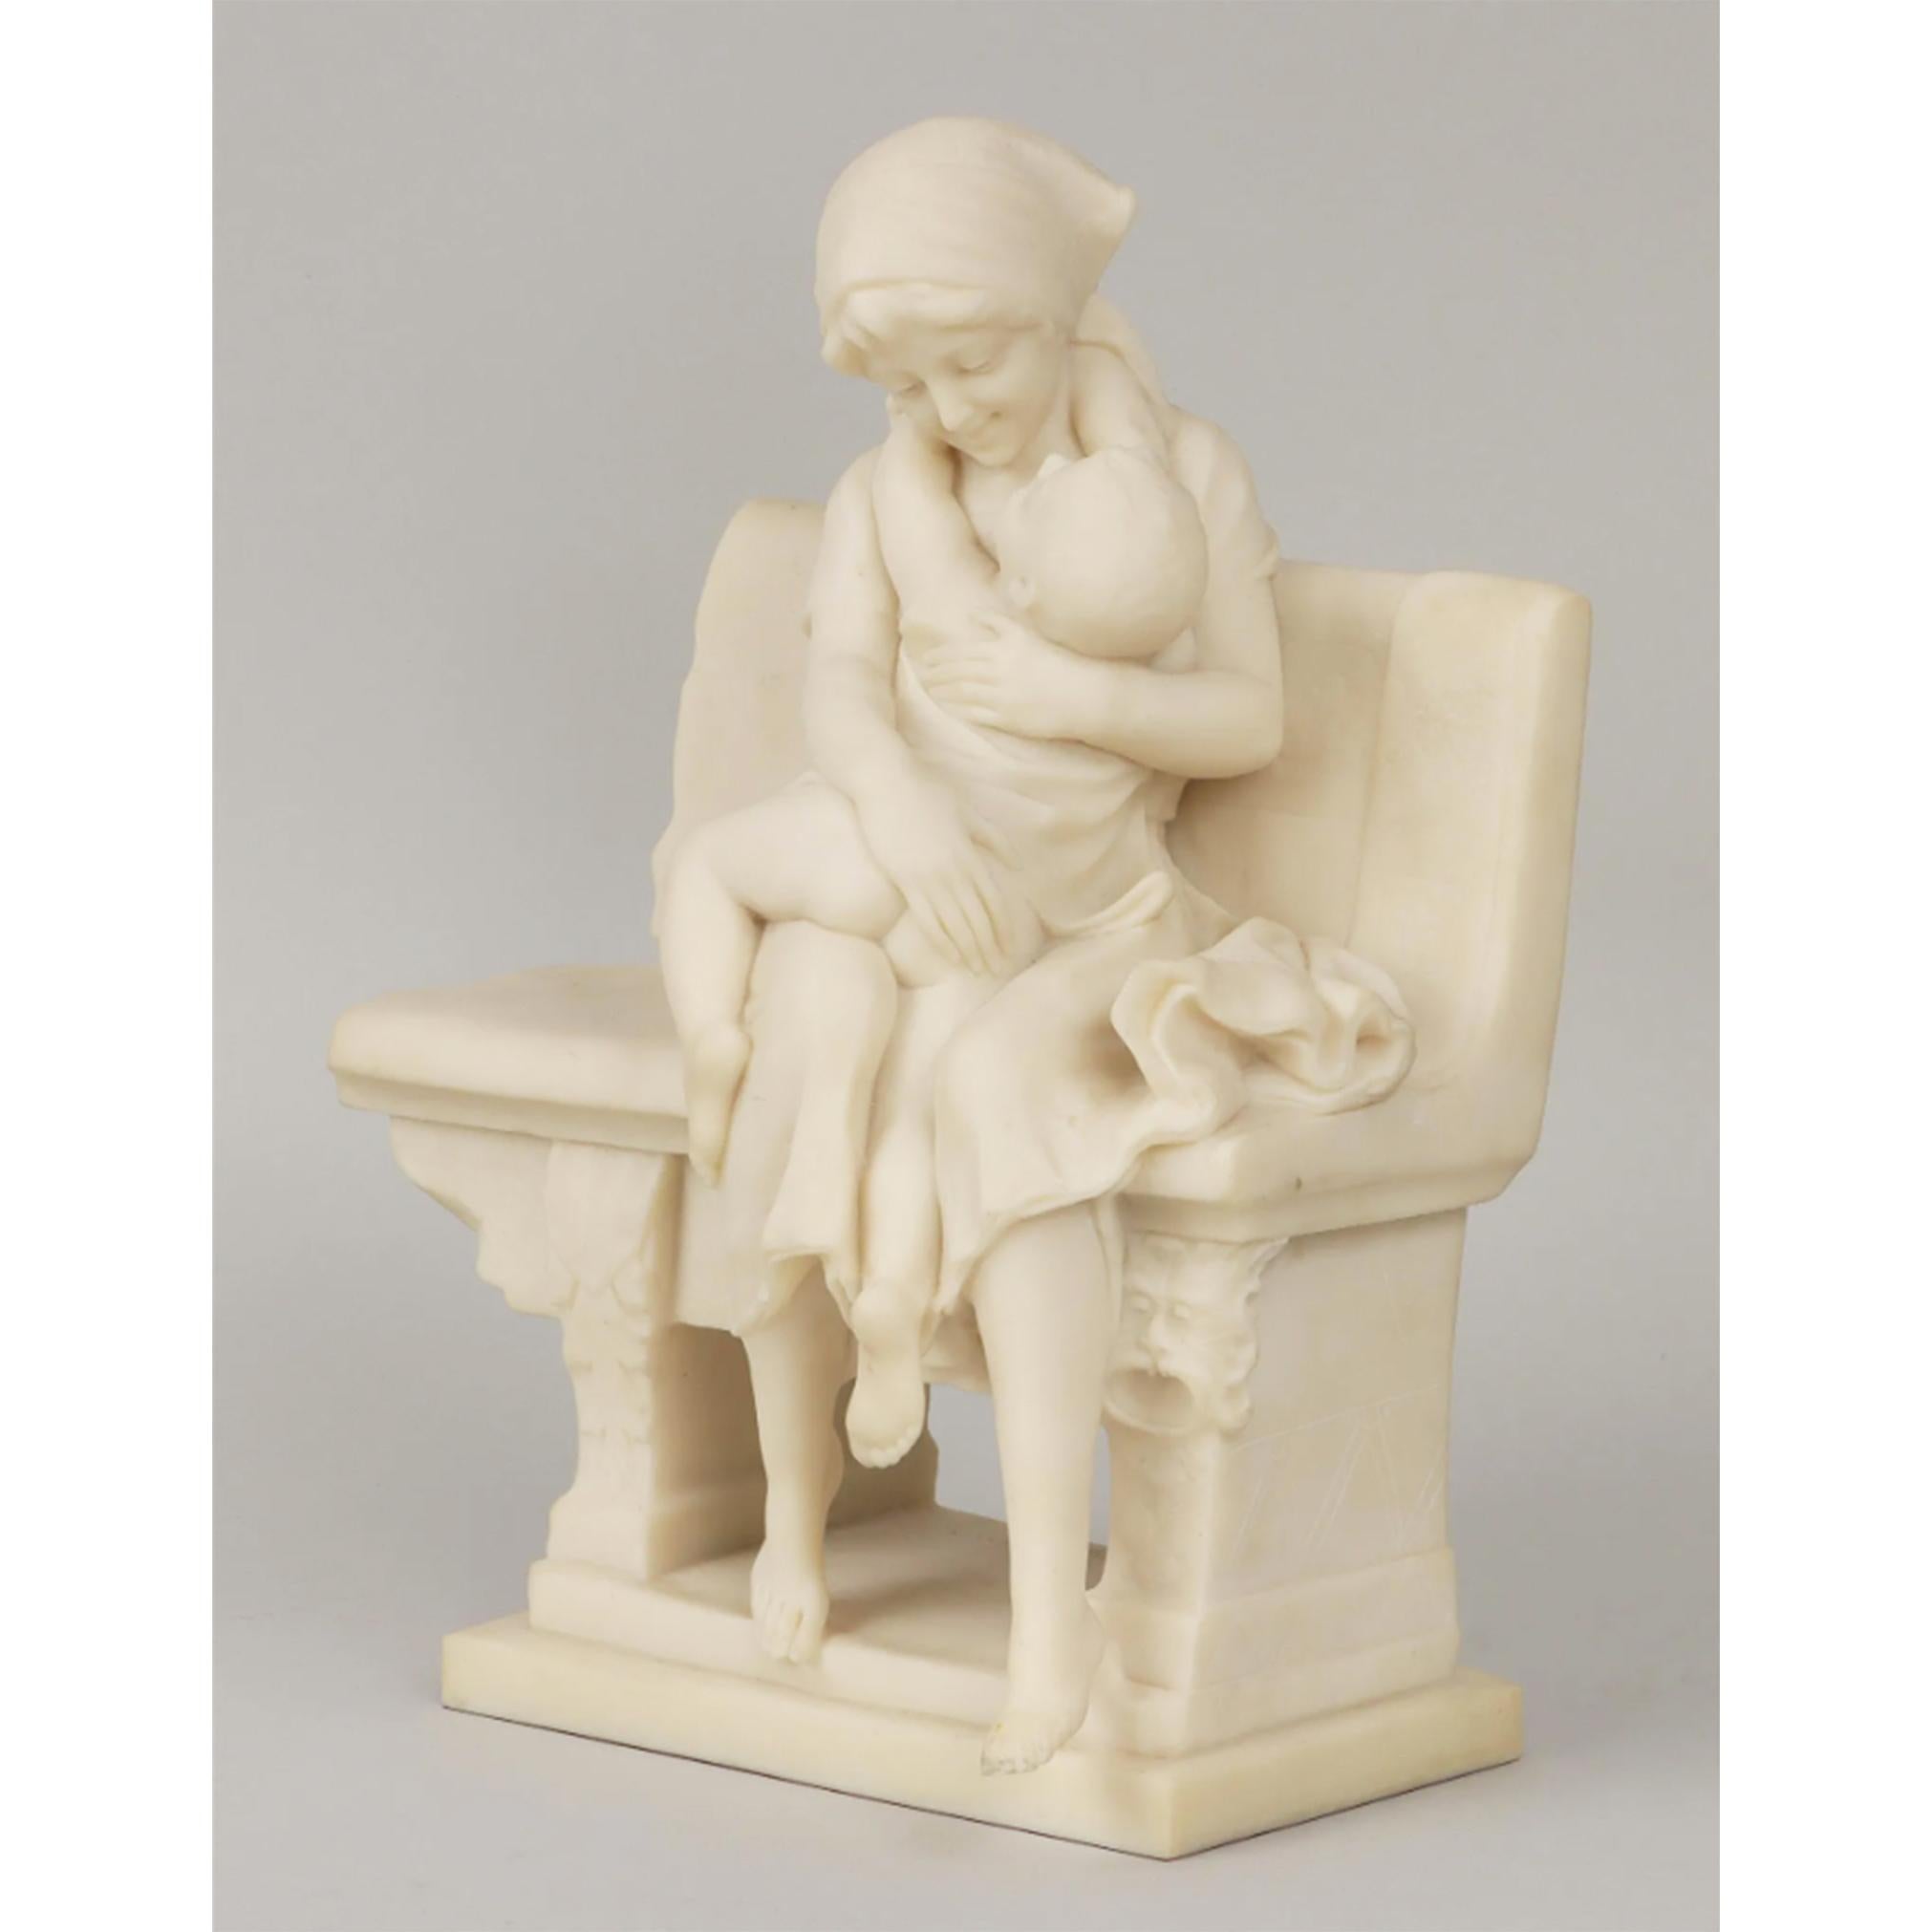 Italian Marble statue of a laughing Young mother and her child embracing on a fragmented bench with low relief details by Antonio Frilli (Italian, 1860-1920). This example is characteristic of other Frilli sculptures of joyful children, a subject he